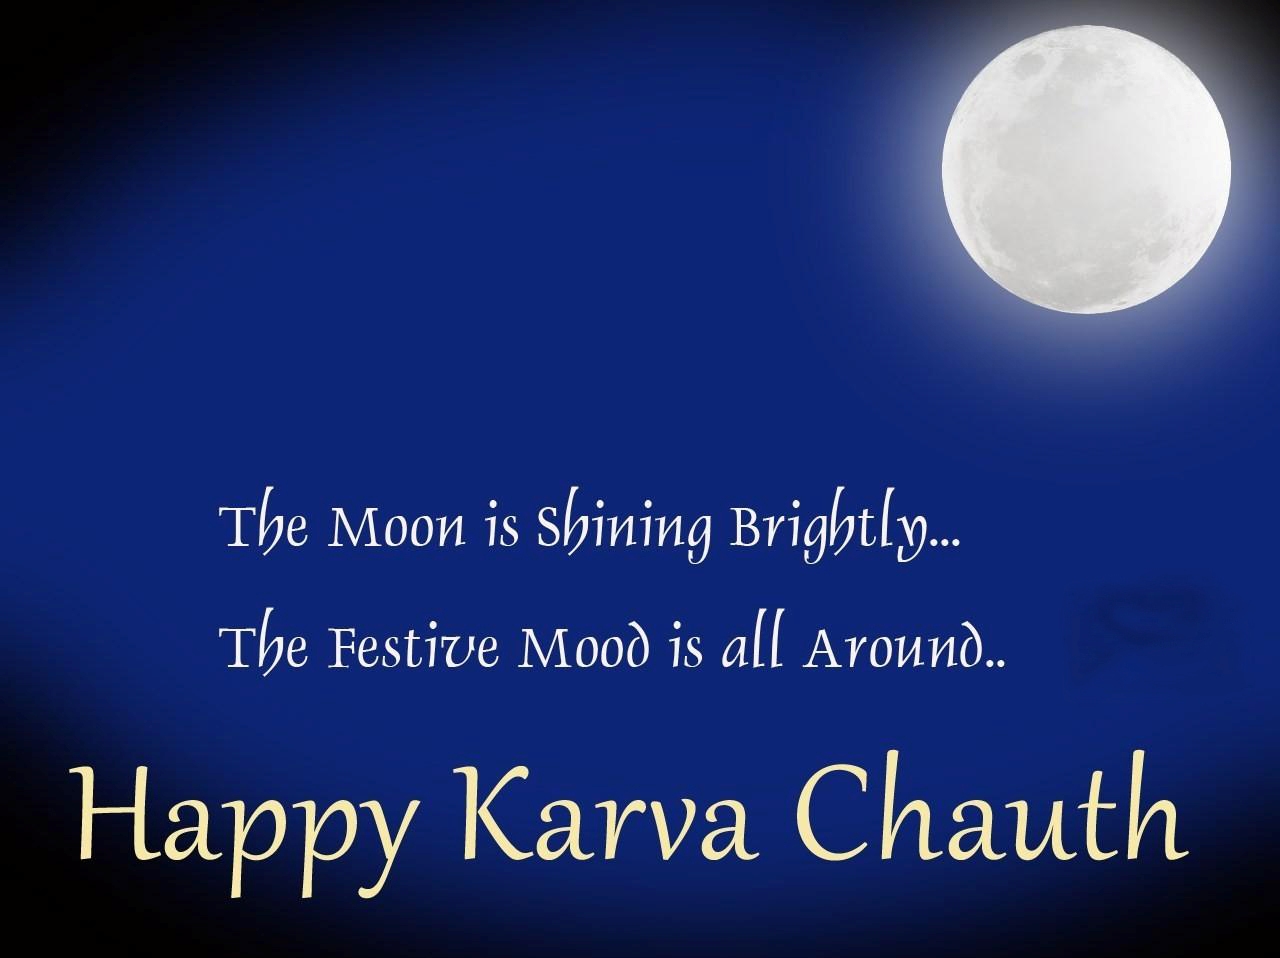 karva chauth images